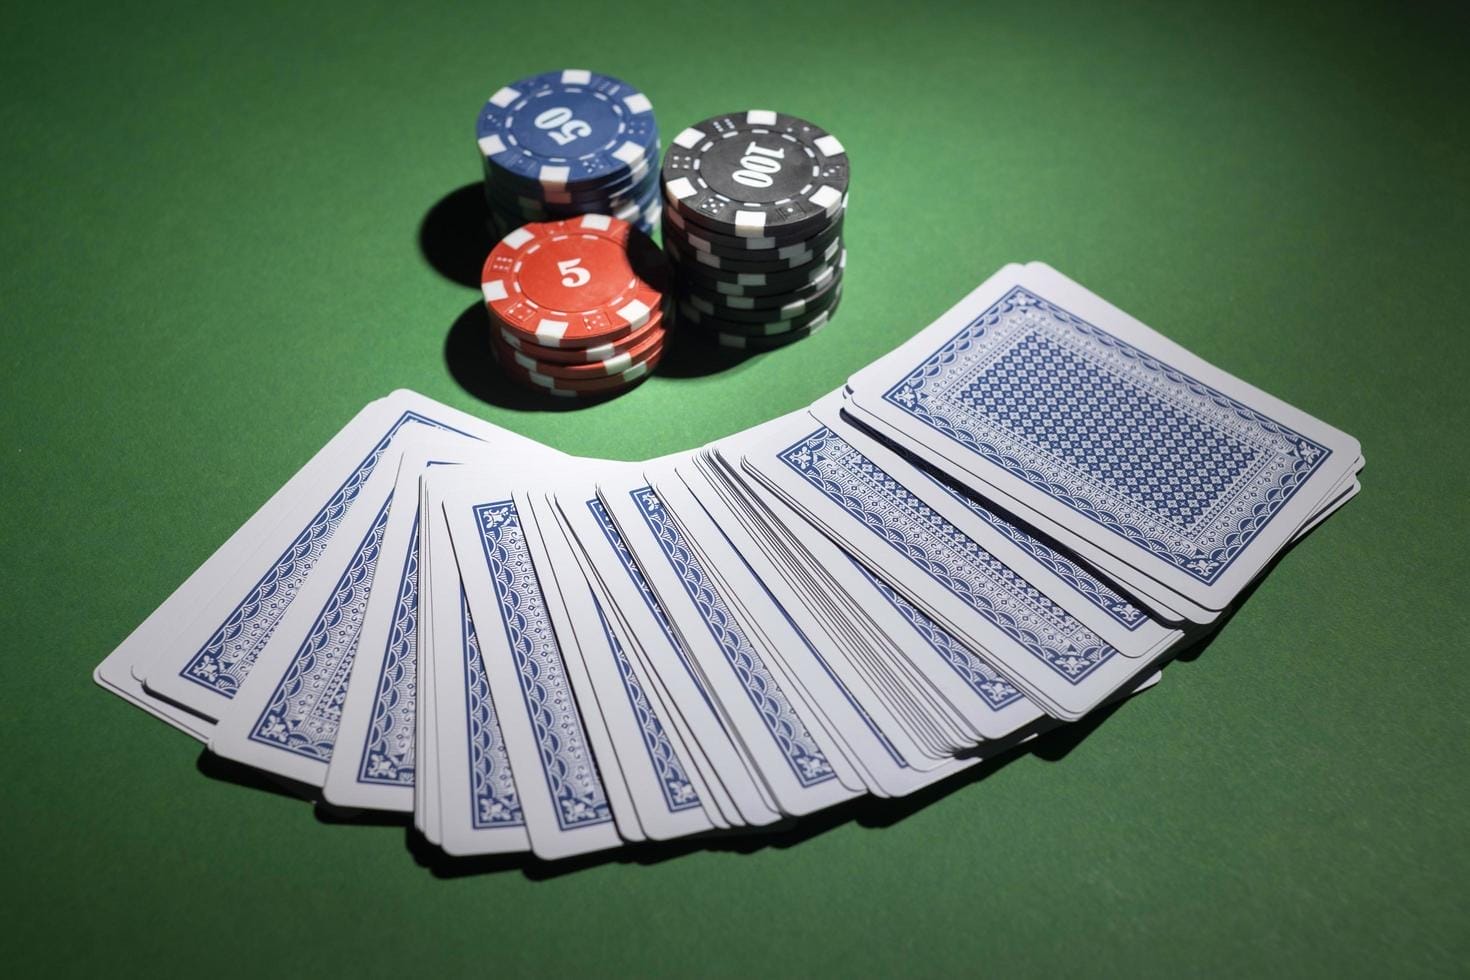 Get comprehensive information about the best and most legit online gambling platforms for New Zealand gamblers. Read on to find out about their security protocols, bonus offers and promotions, licensing, and so much more!